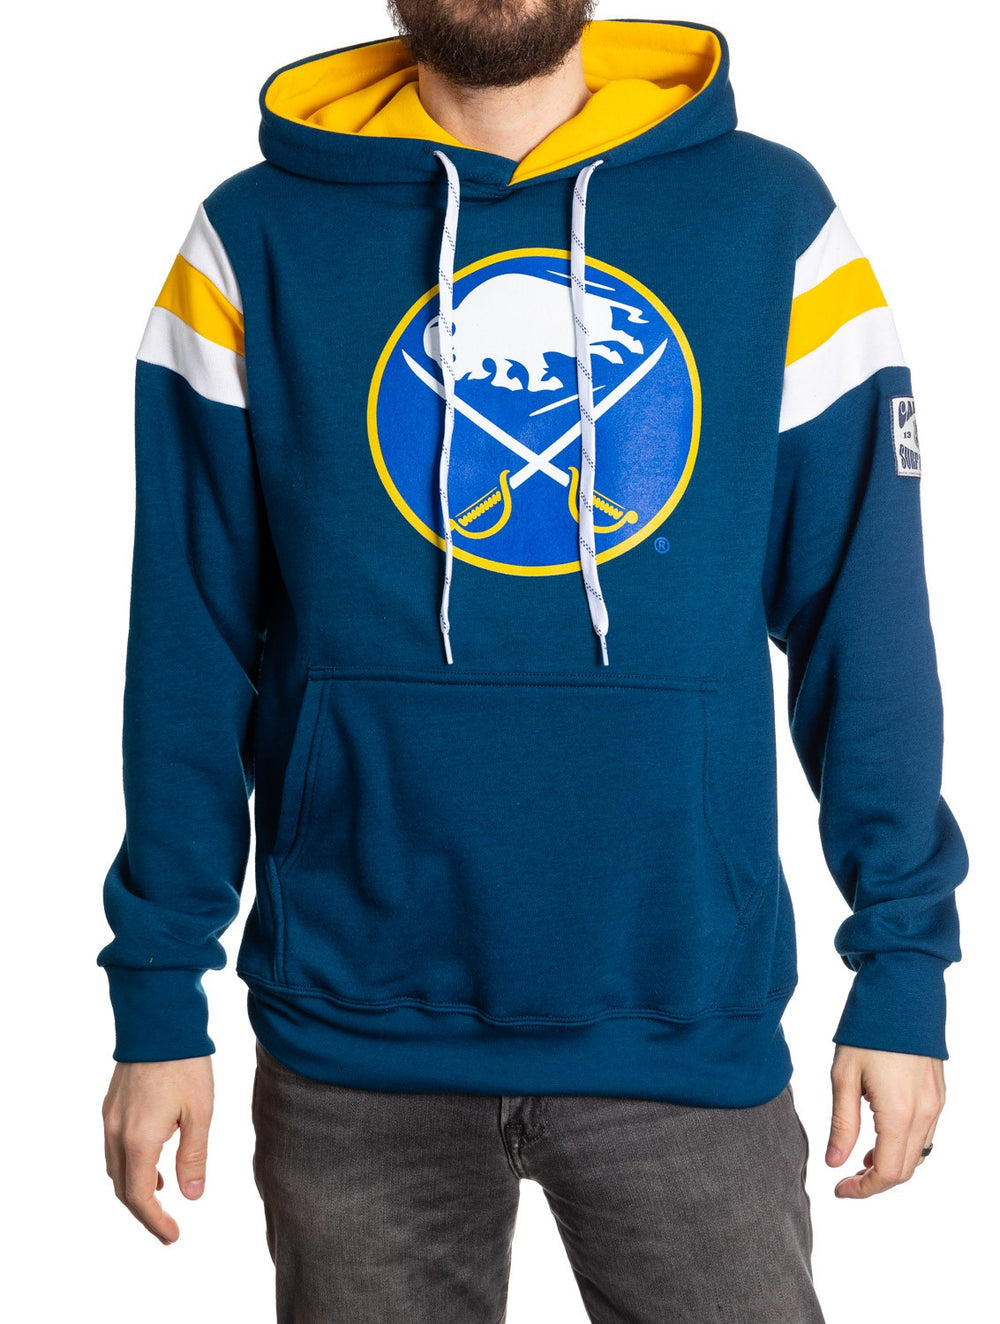  Calhoun NHL Surf & Skate Unisex Waffle Frayed Patch Pullover  Hoodie – The Coastal Collection (Boston Bruins, Small) : Sports & Outdoors